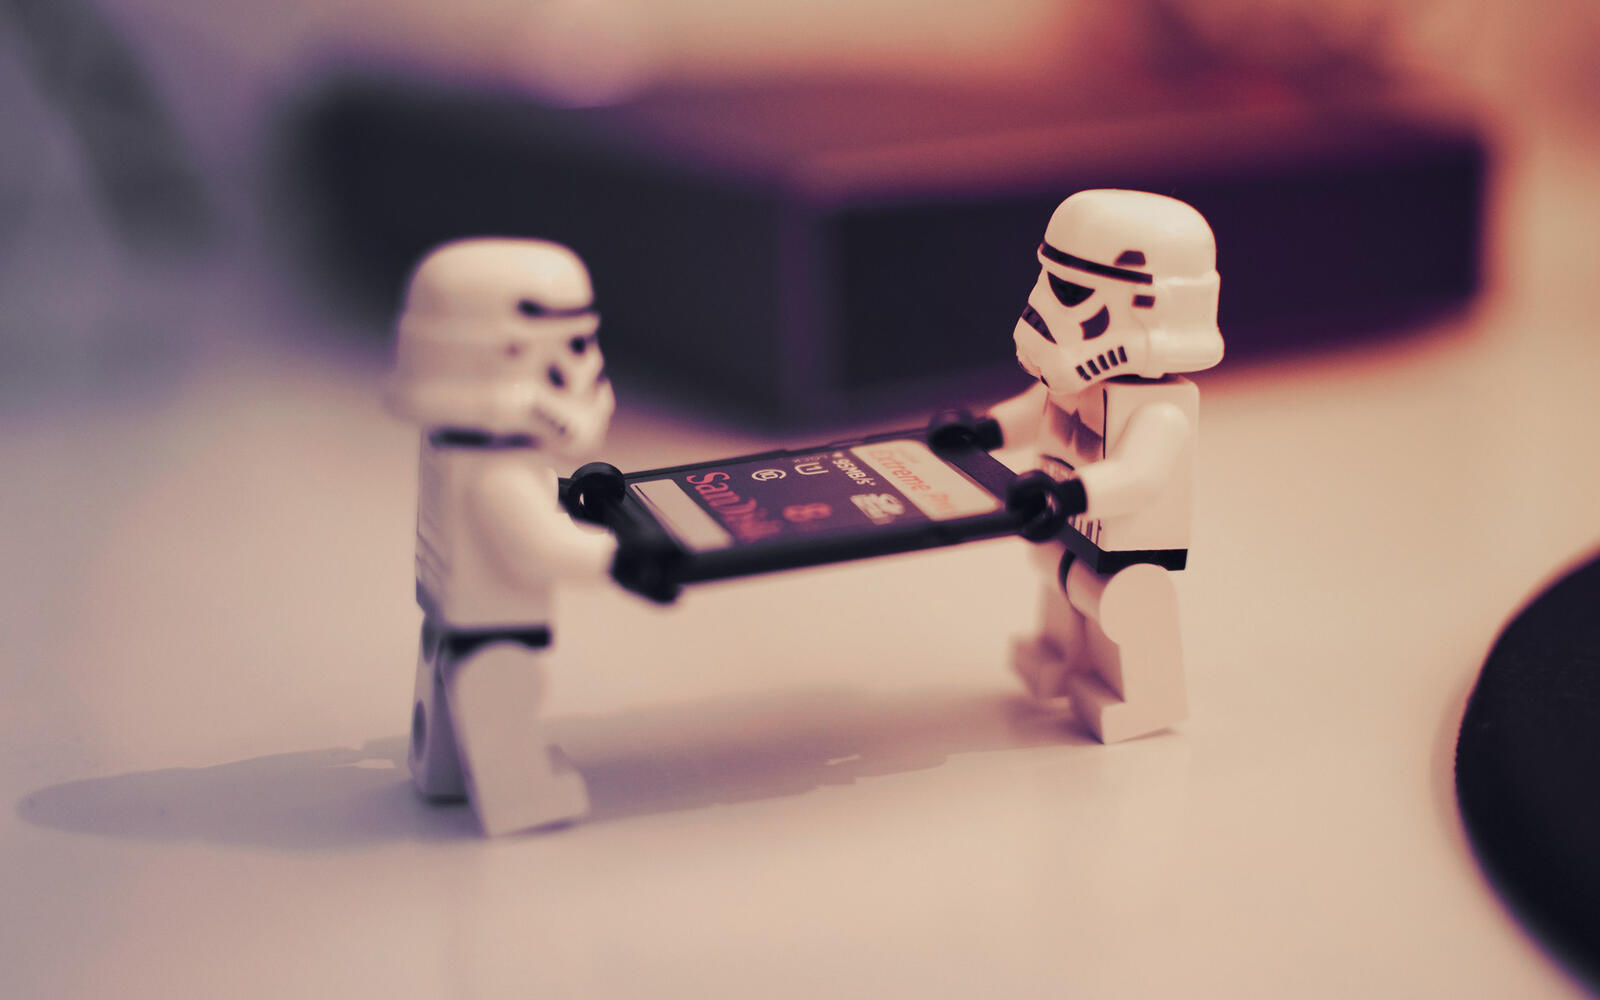 Wallpapers flash drive people lego on the desktop